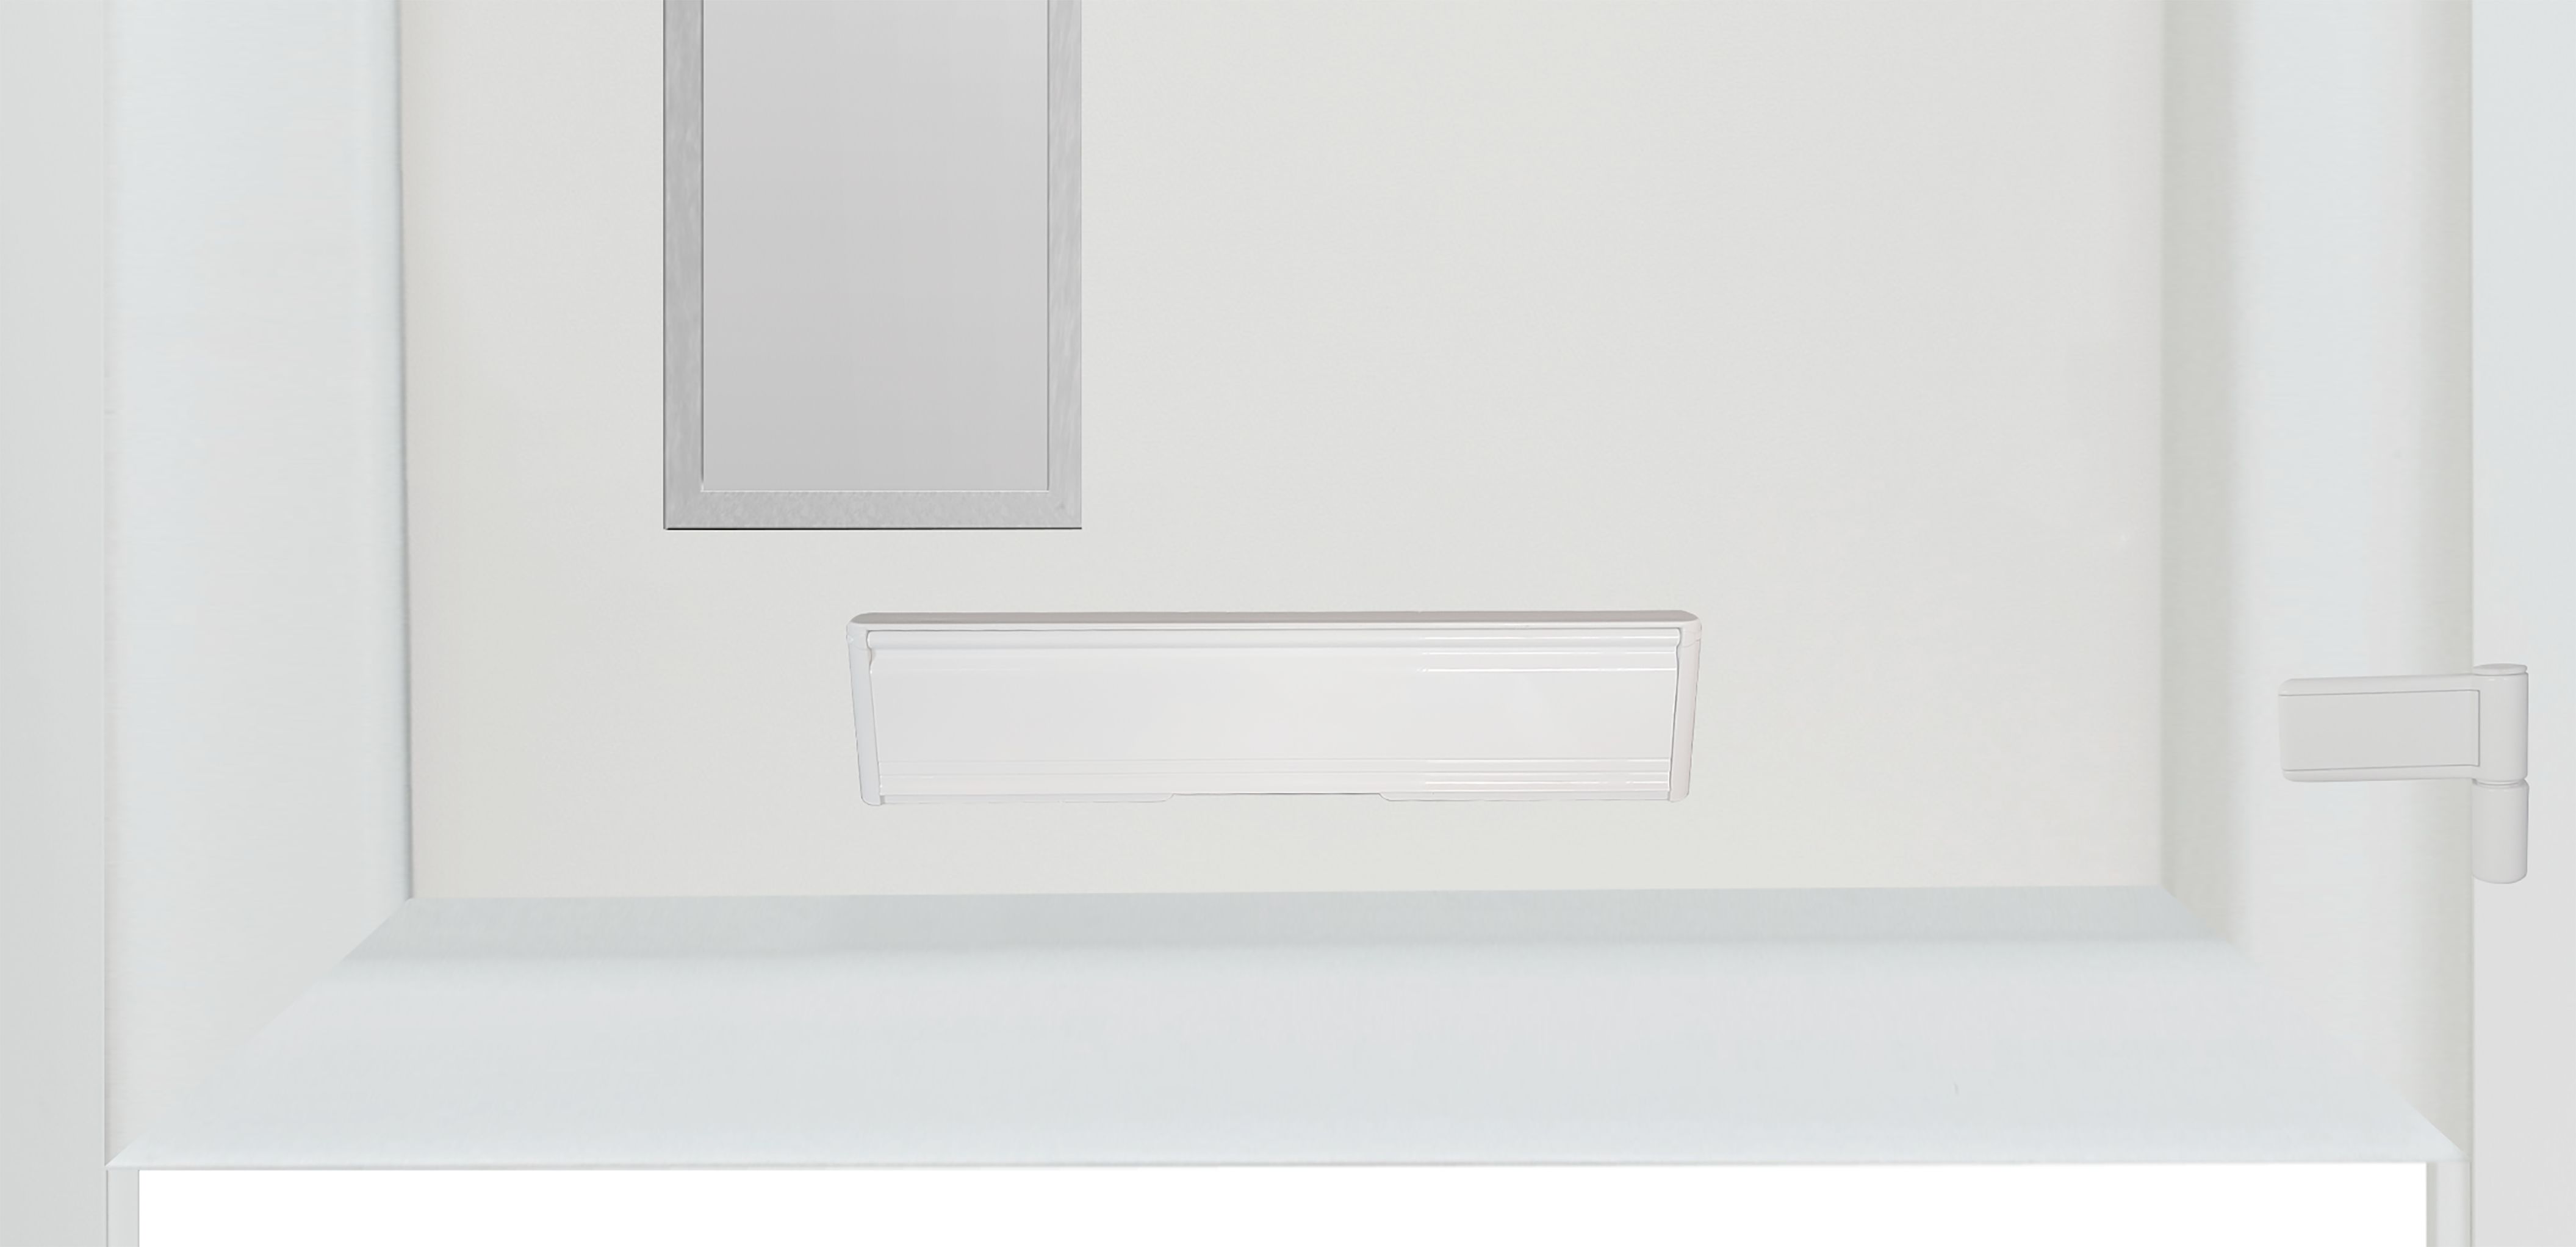 Fortia Gatteo Frosted Glazed Antracite LH External Front Door set, (H)2085mm (W)920mm